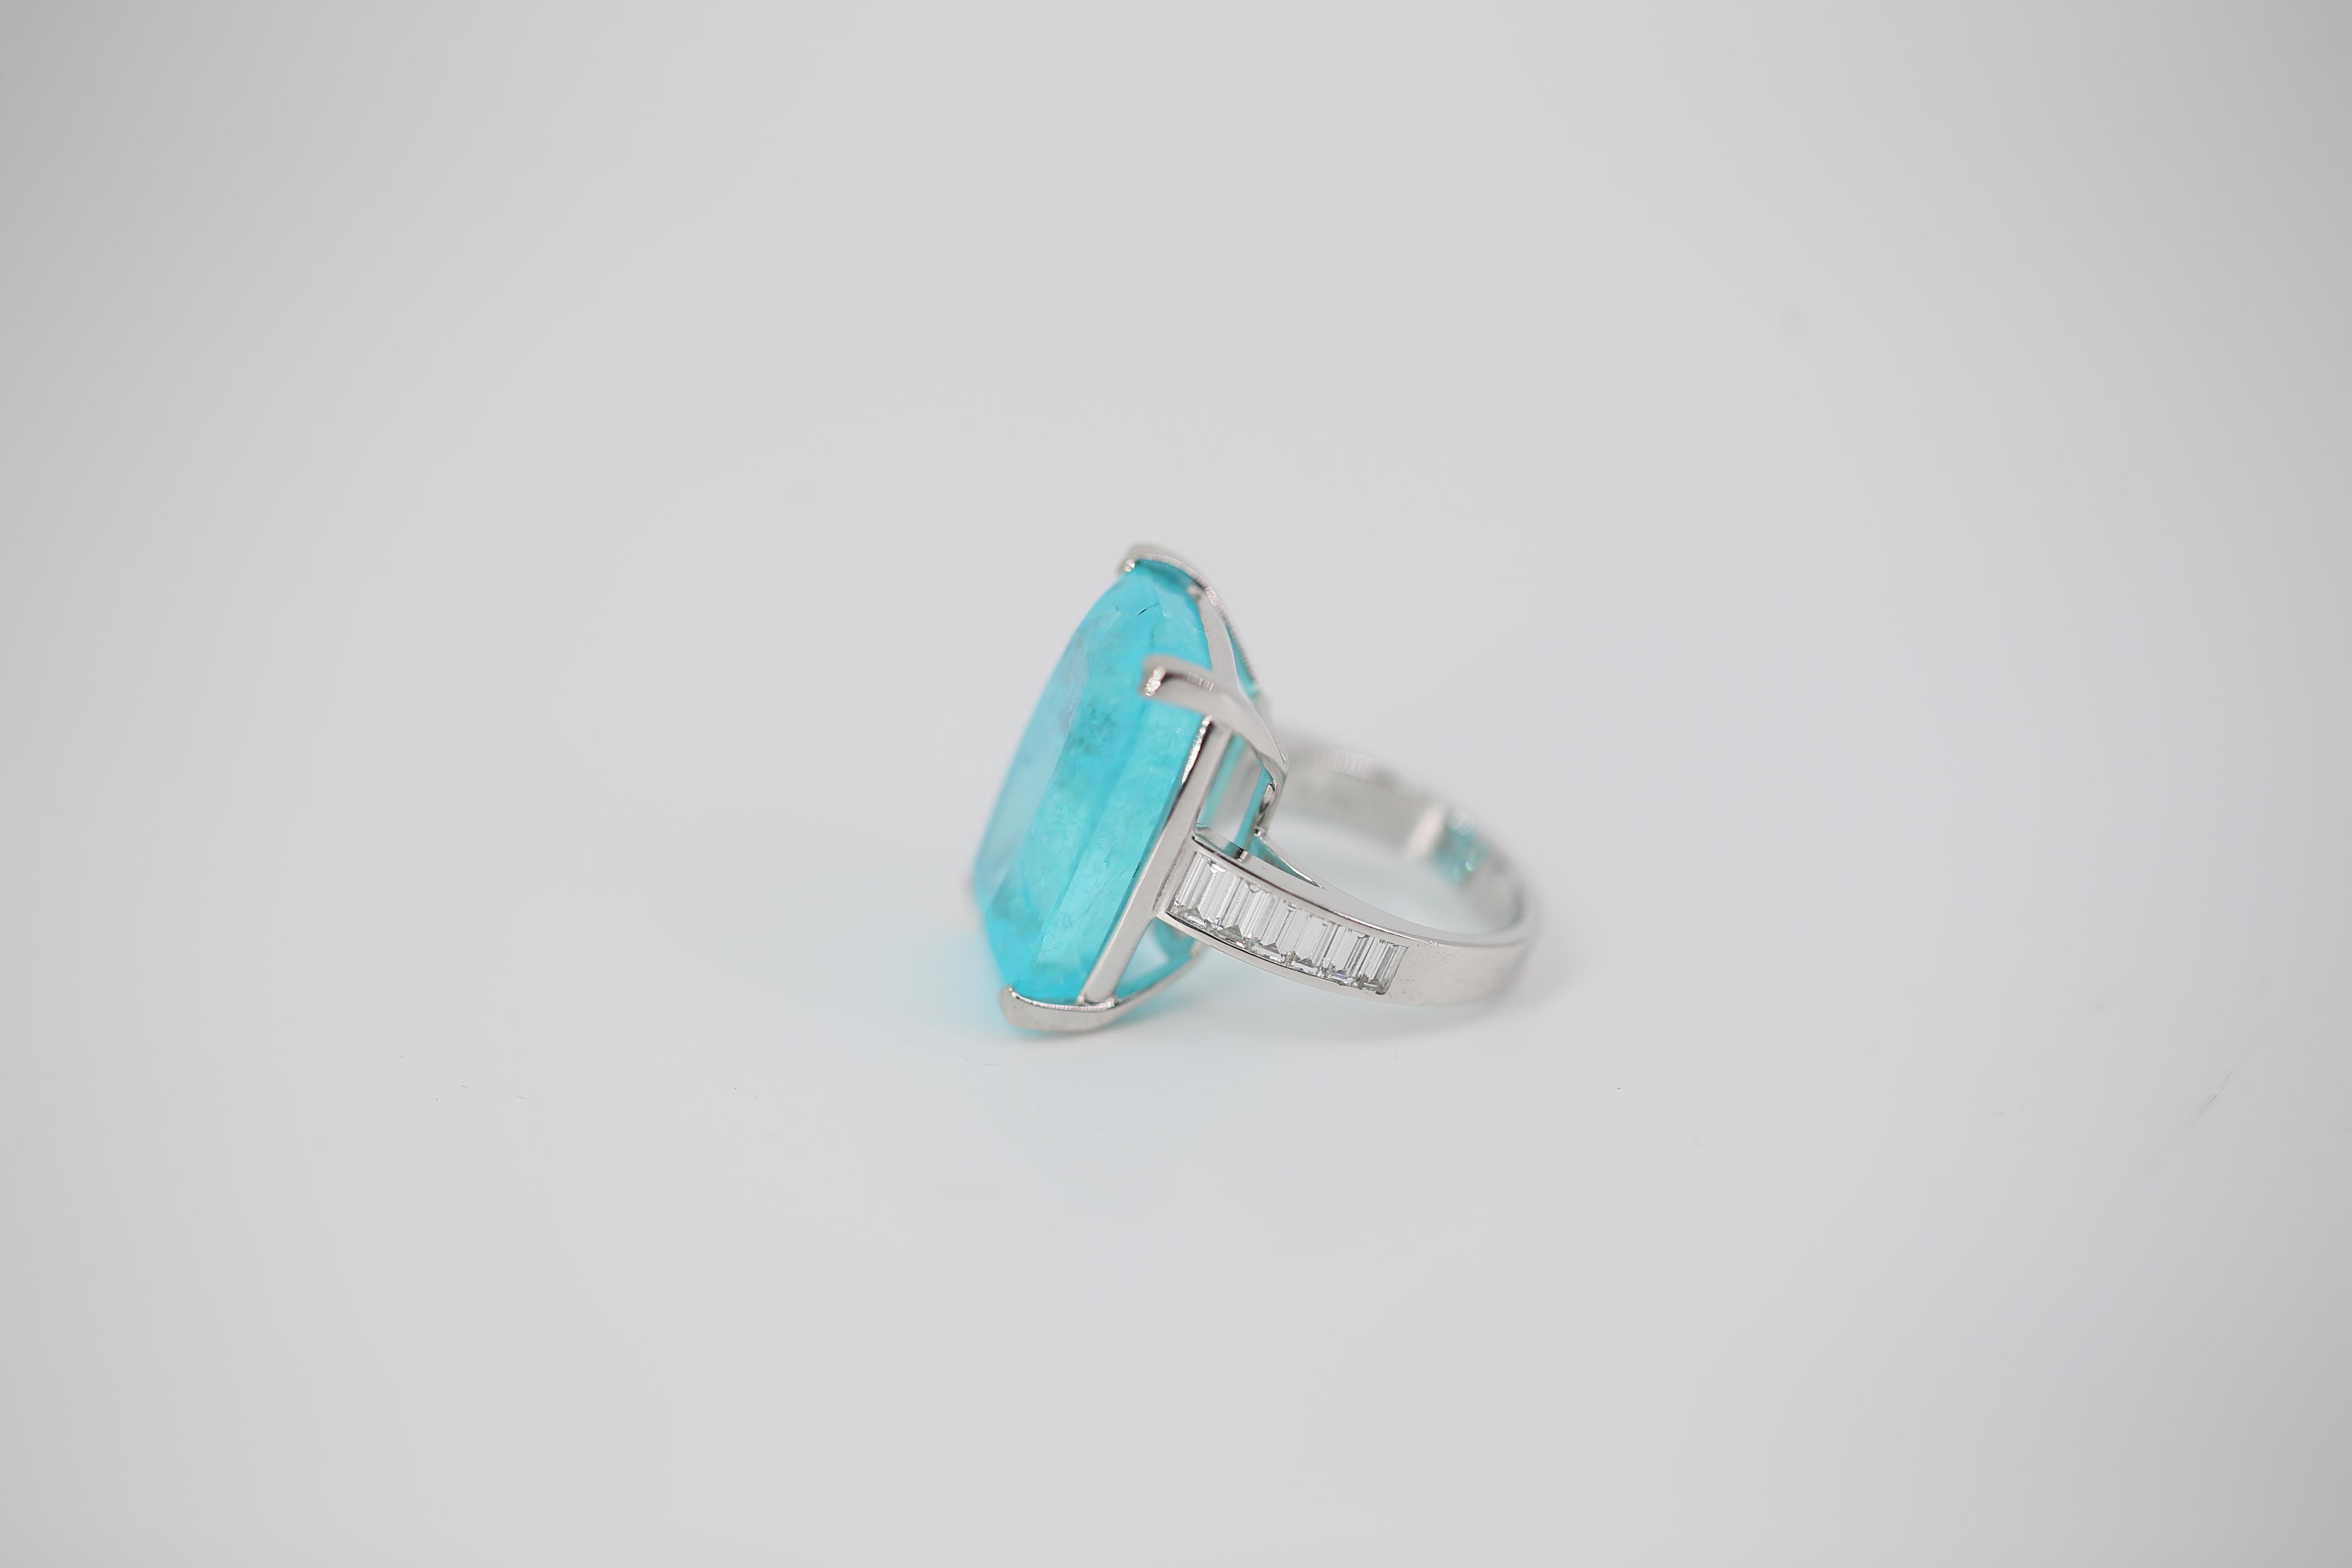 Neoclassical GIA Certified 27.9 Carat Paraiba Tourmaline Diamond 18K White Gold Cocktail Ring For Sale